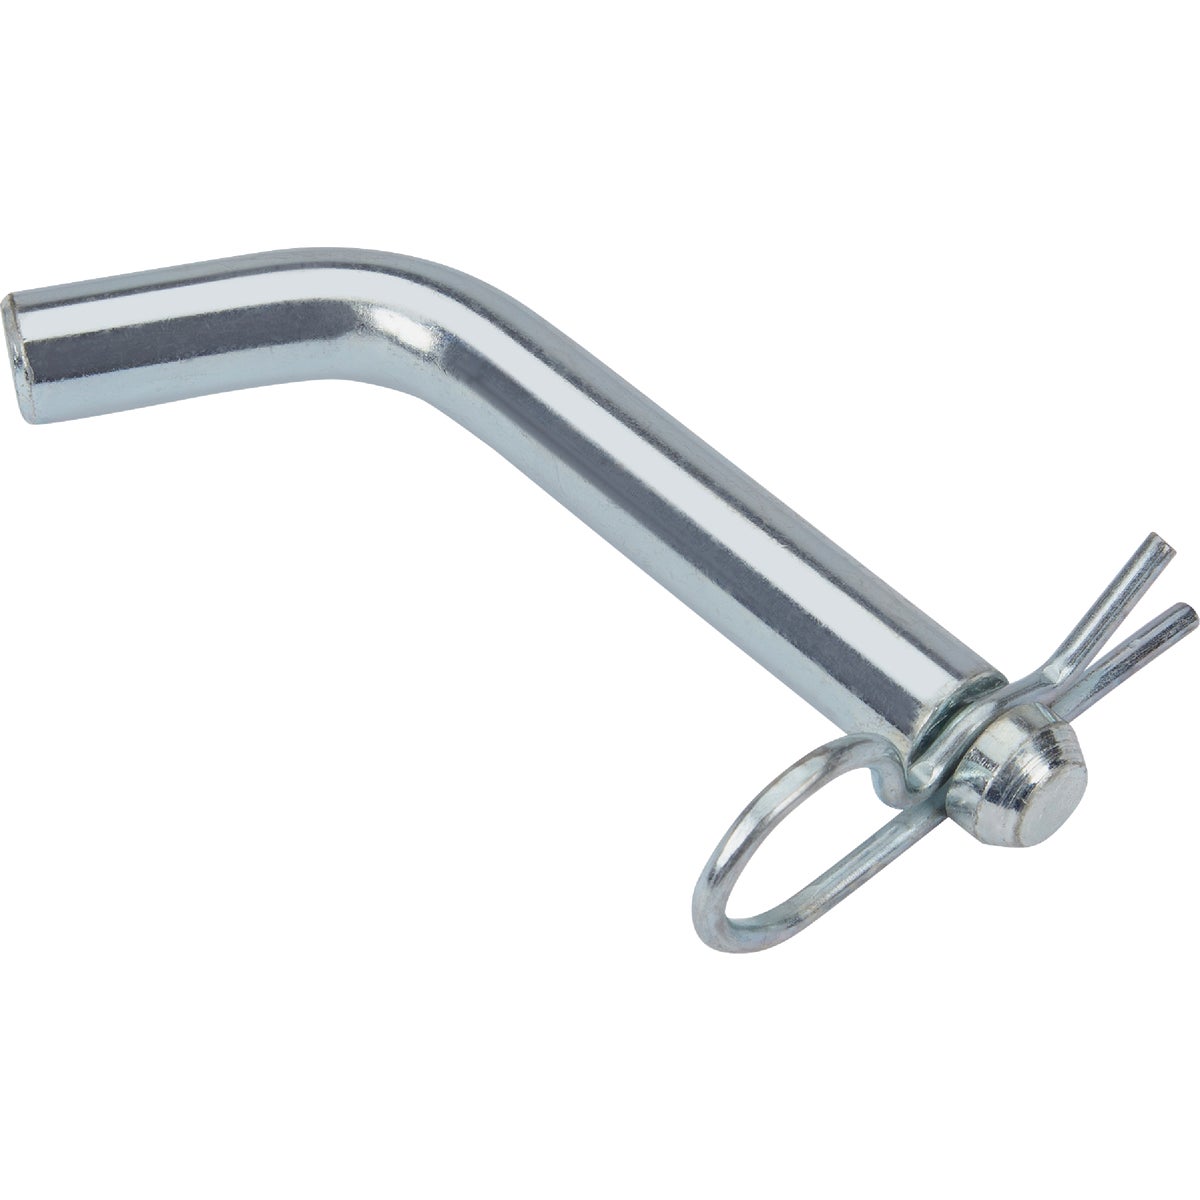 Item 581607, The Standard Steel Bent Hitch pin with Clip protects your boats, campers, 